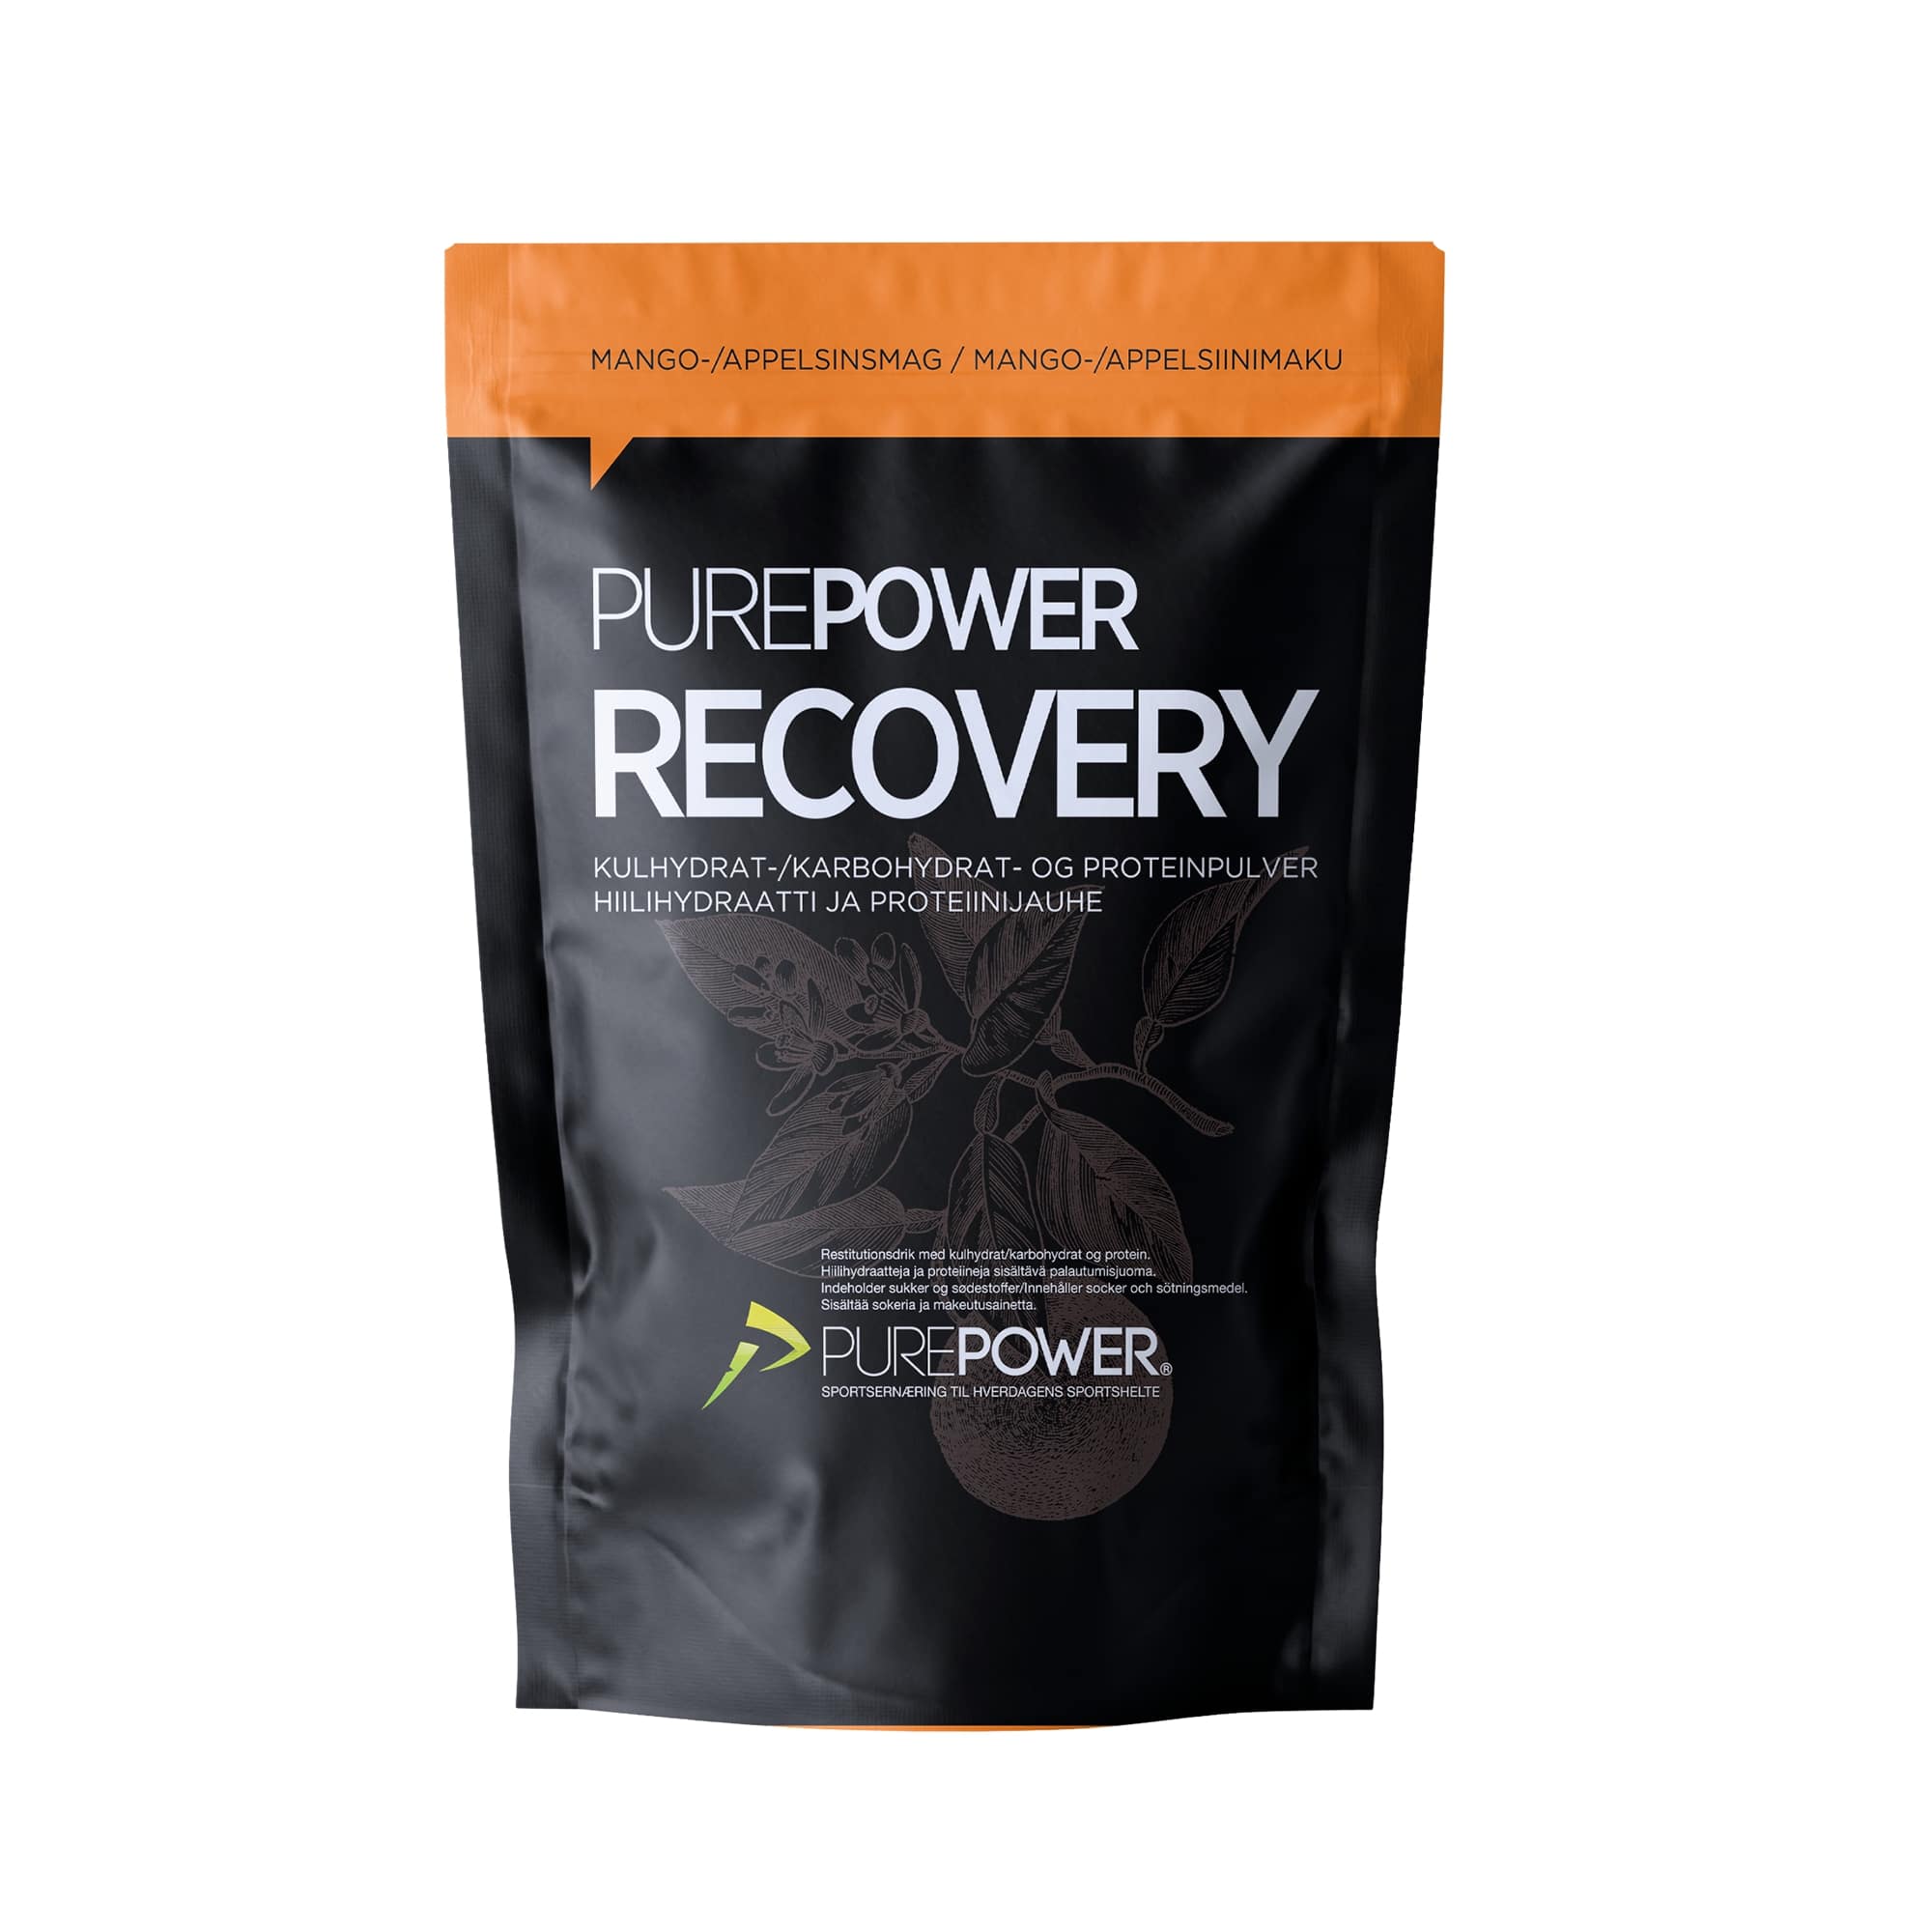 Recovery proteinpulver, Purepower recovery, Bedste recovery proteinpulver, Bedste proteinpulver, bedste proteinpulver 2022, Purepower proteinpulver, bedst i test, proteinpulver test, bedste valleprotein, bedste whey 100 protein, MIX 3 KG. proteinpulver, proteinpulver smag, 2023